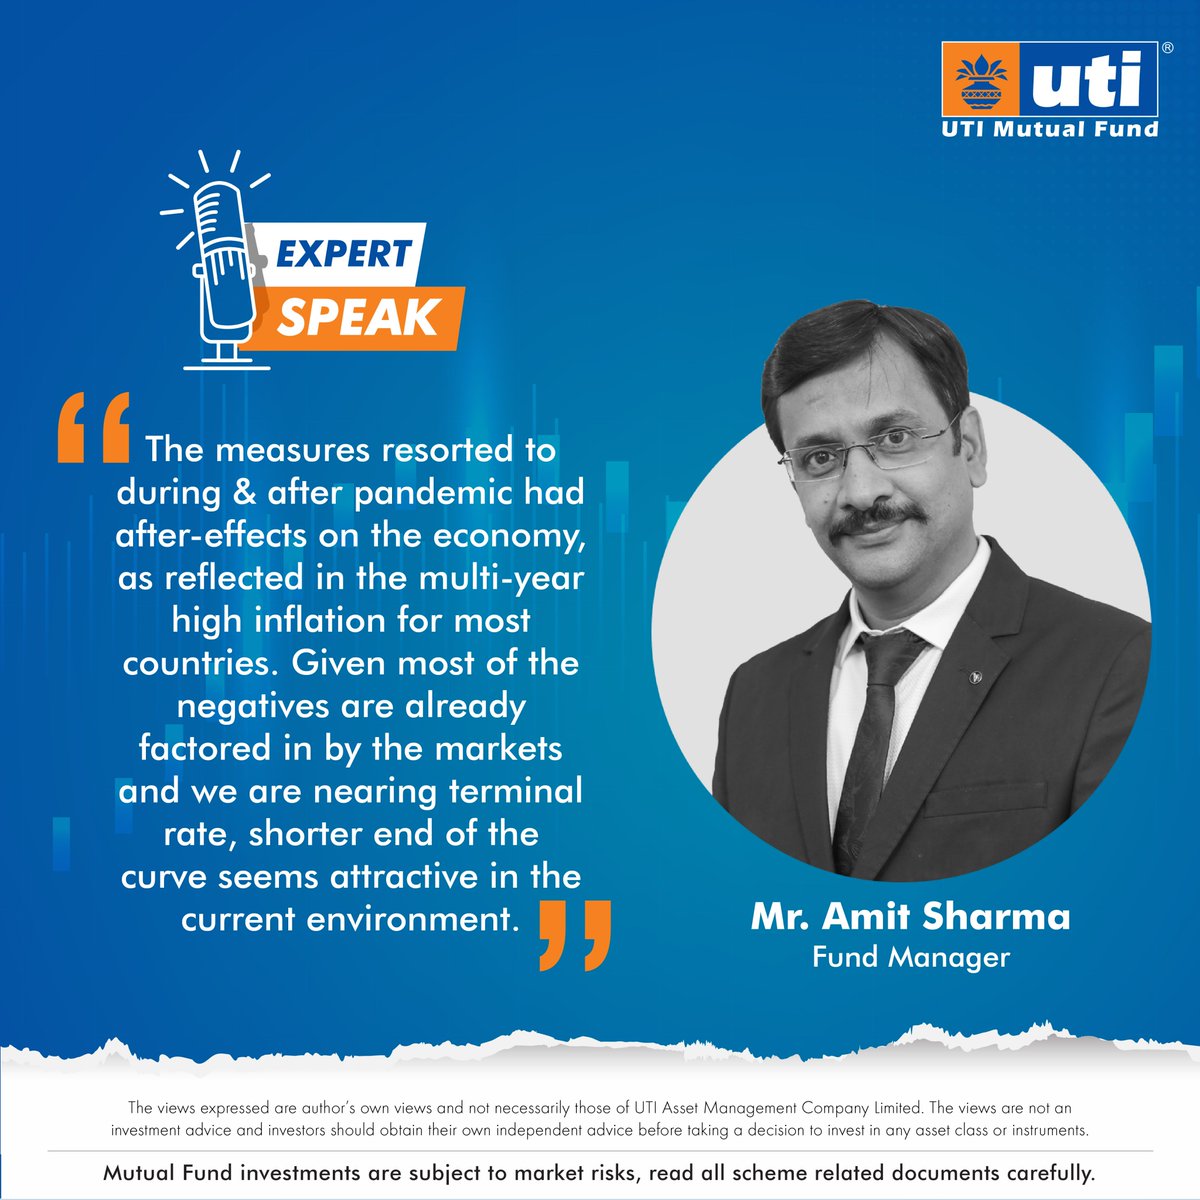 Mr. Amit Sharma, Fund Manager, explains why the shorter end of the yield curve looks attractive in this current environment. 

Read More: bit.ly/3jUfCYO

#ExpertSpeak #UTIMutualFund #MutualFunds